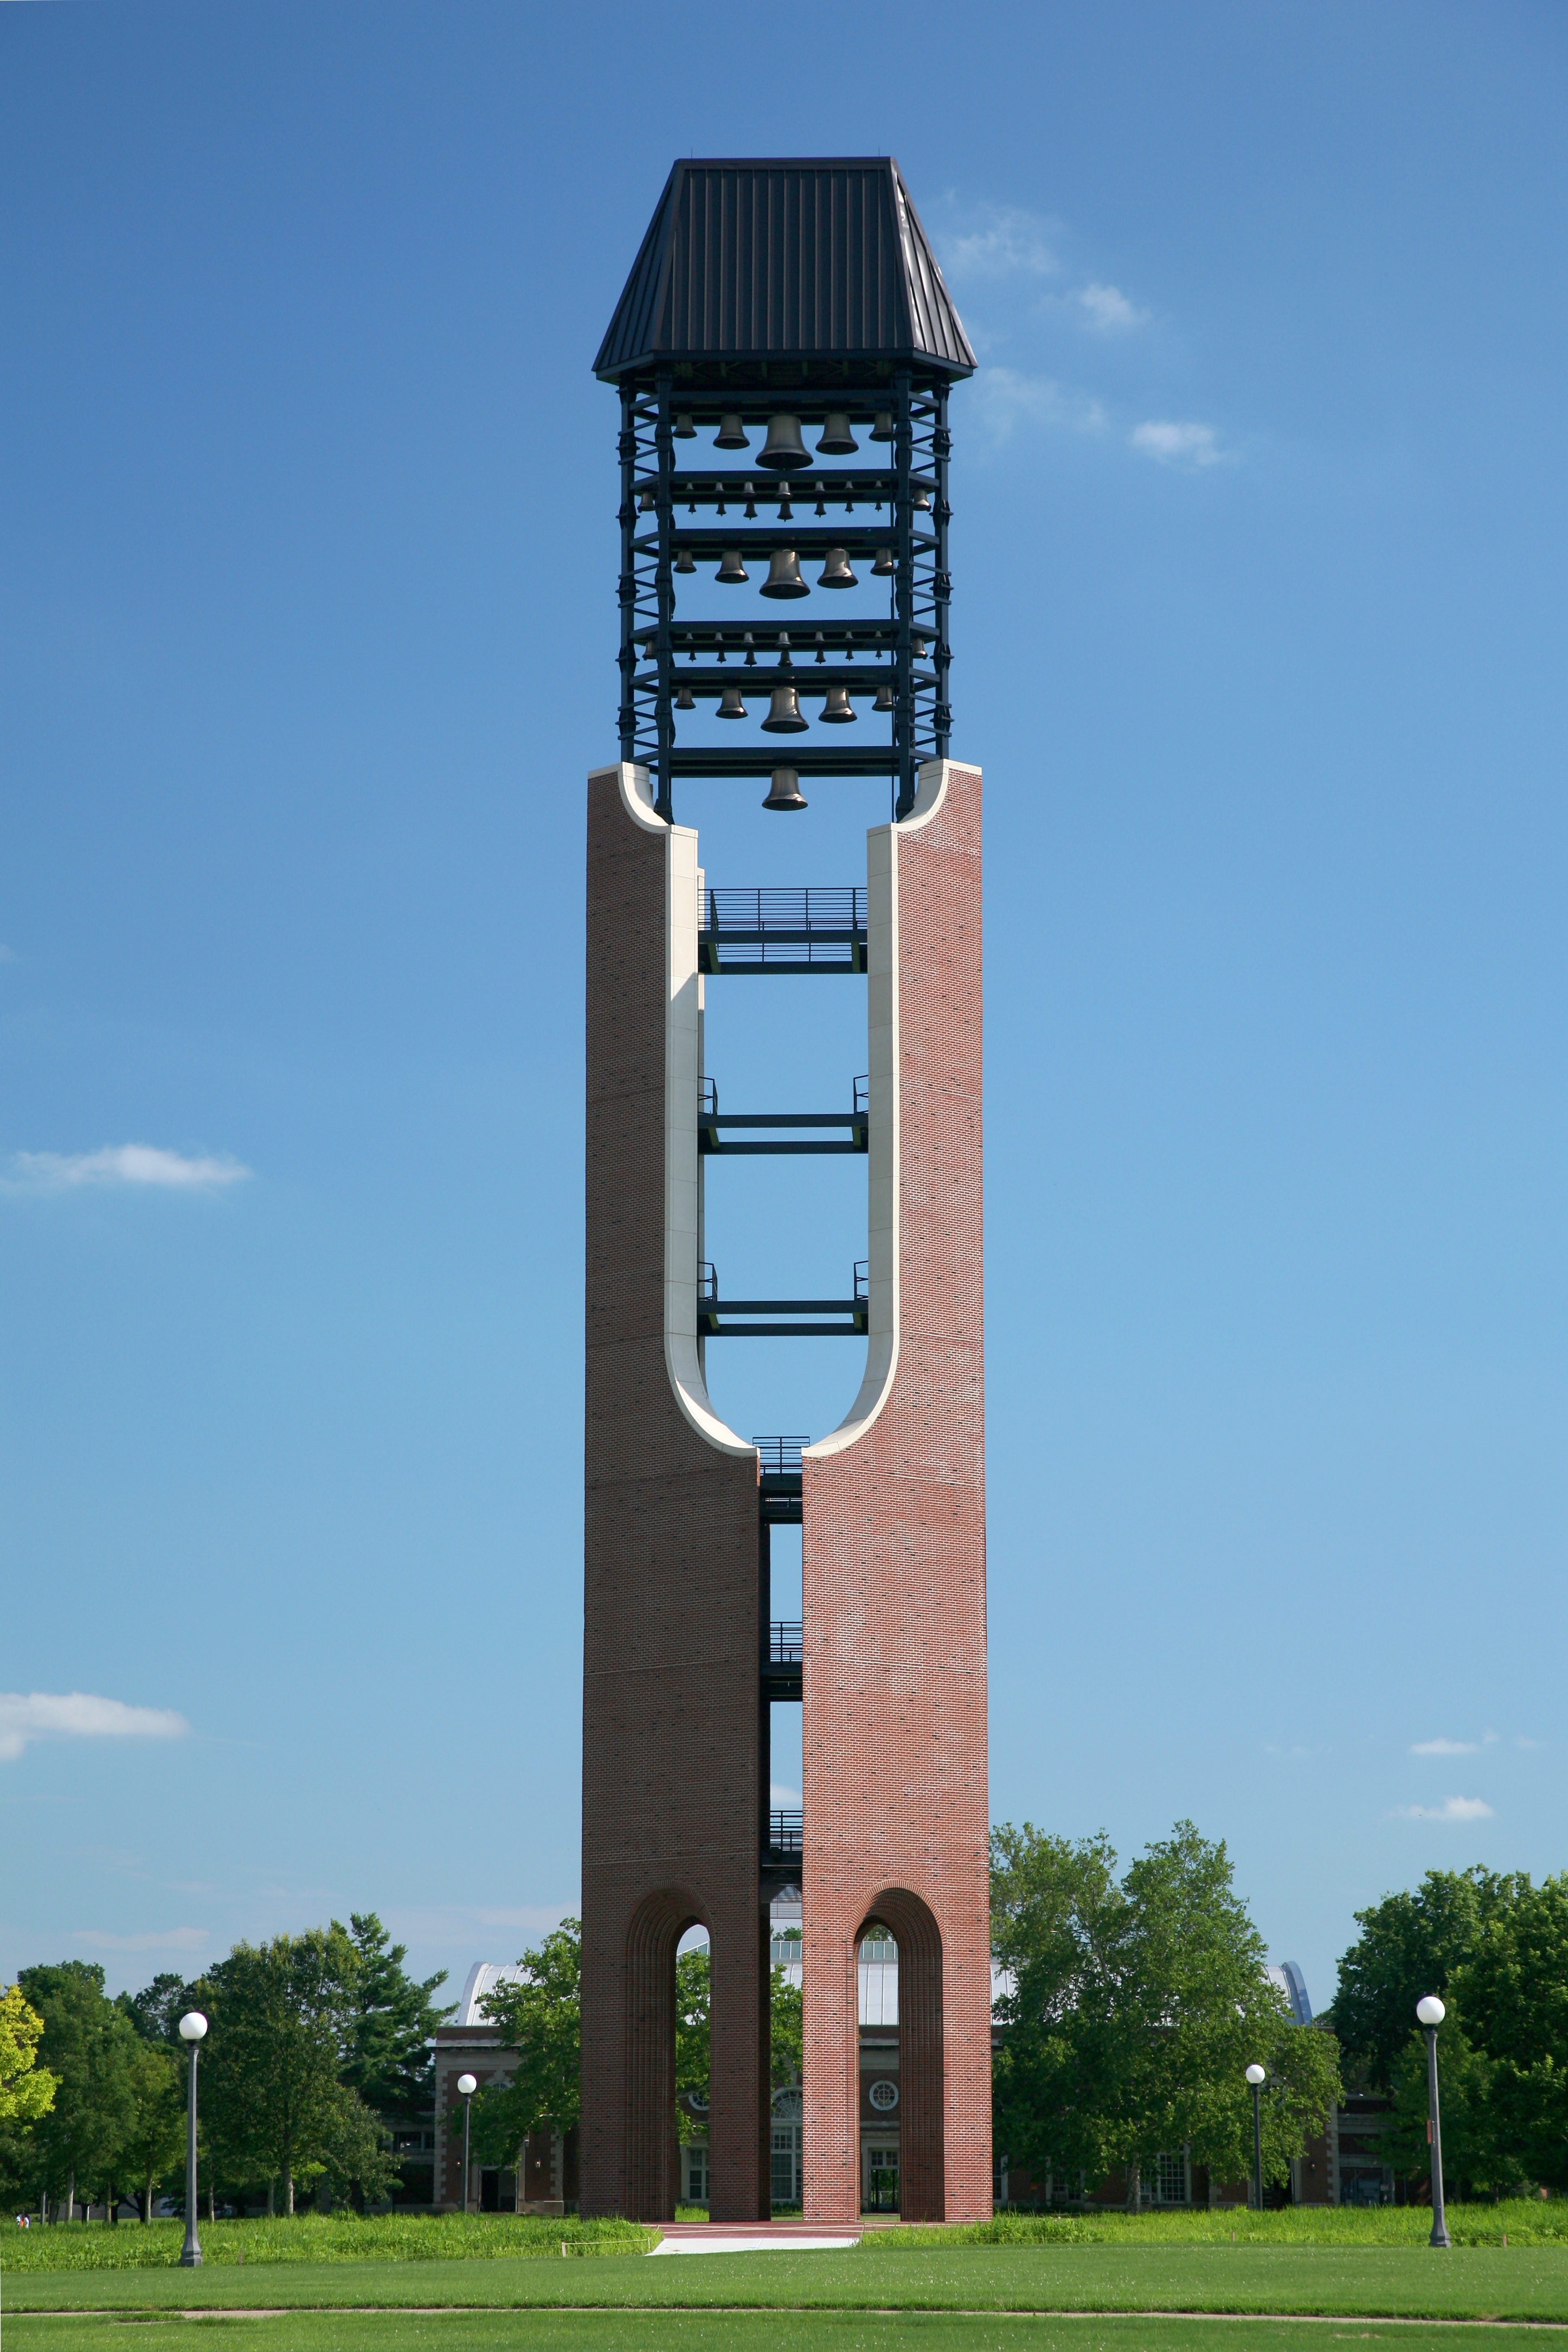 File:UIUC Bell Tower.jpg - Wikimedia Commons